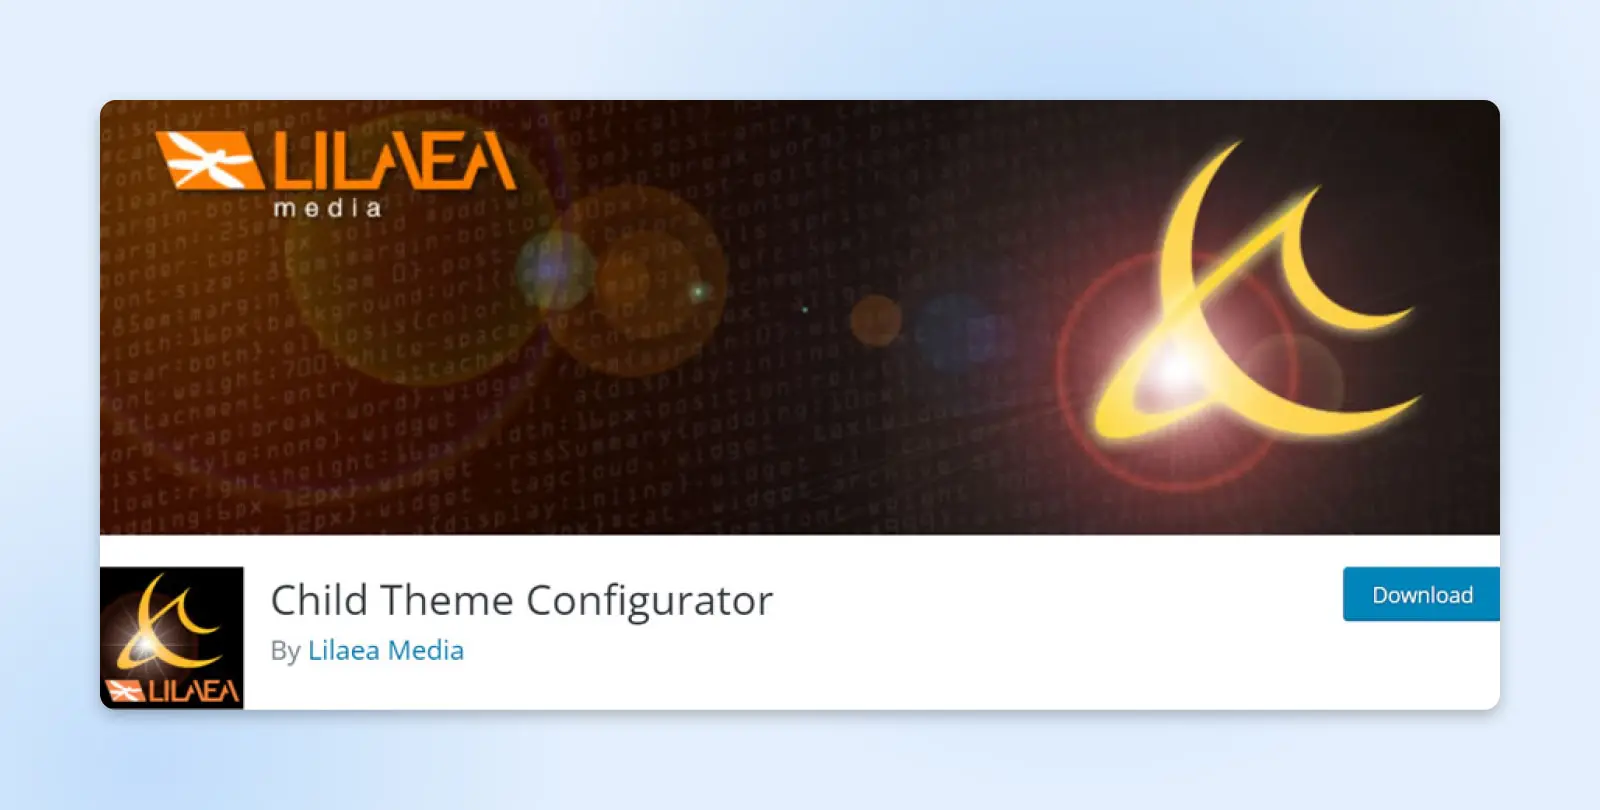 Child Theme Configurator by Lilaea Media screenshot of download button 